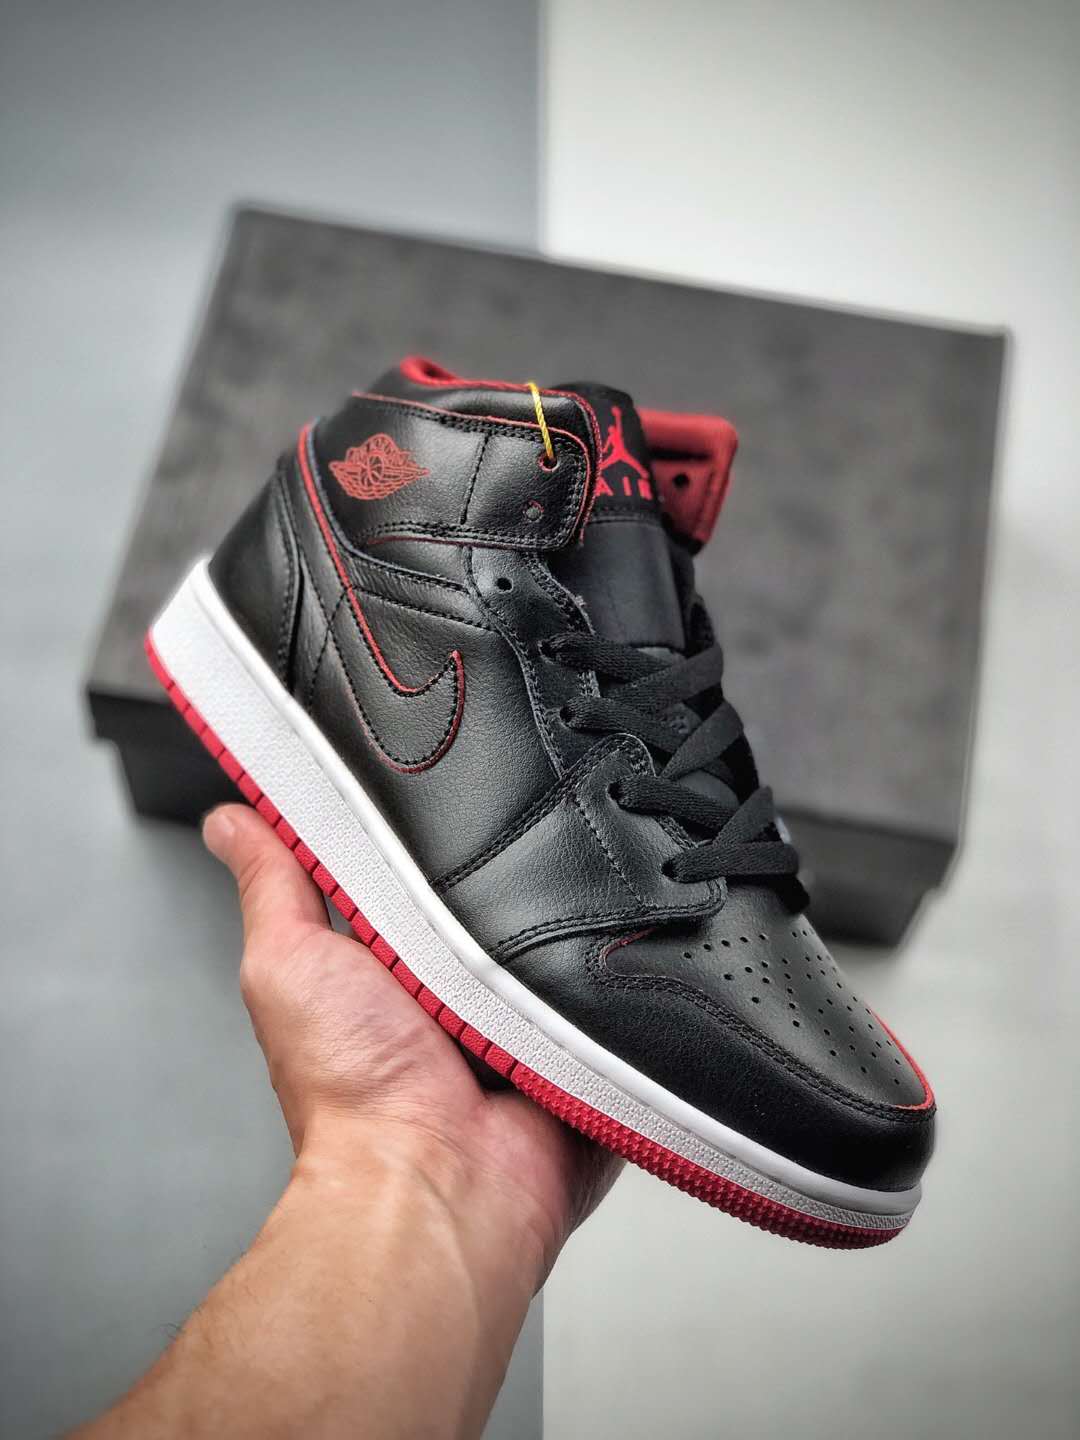 Air Jordan 1 Retro Mid - Black Gym Red 554725-028: The Perfect Sneakers for Style and Performance